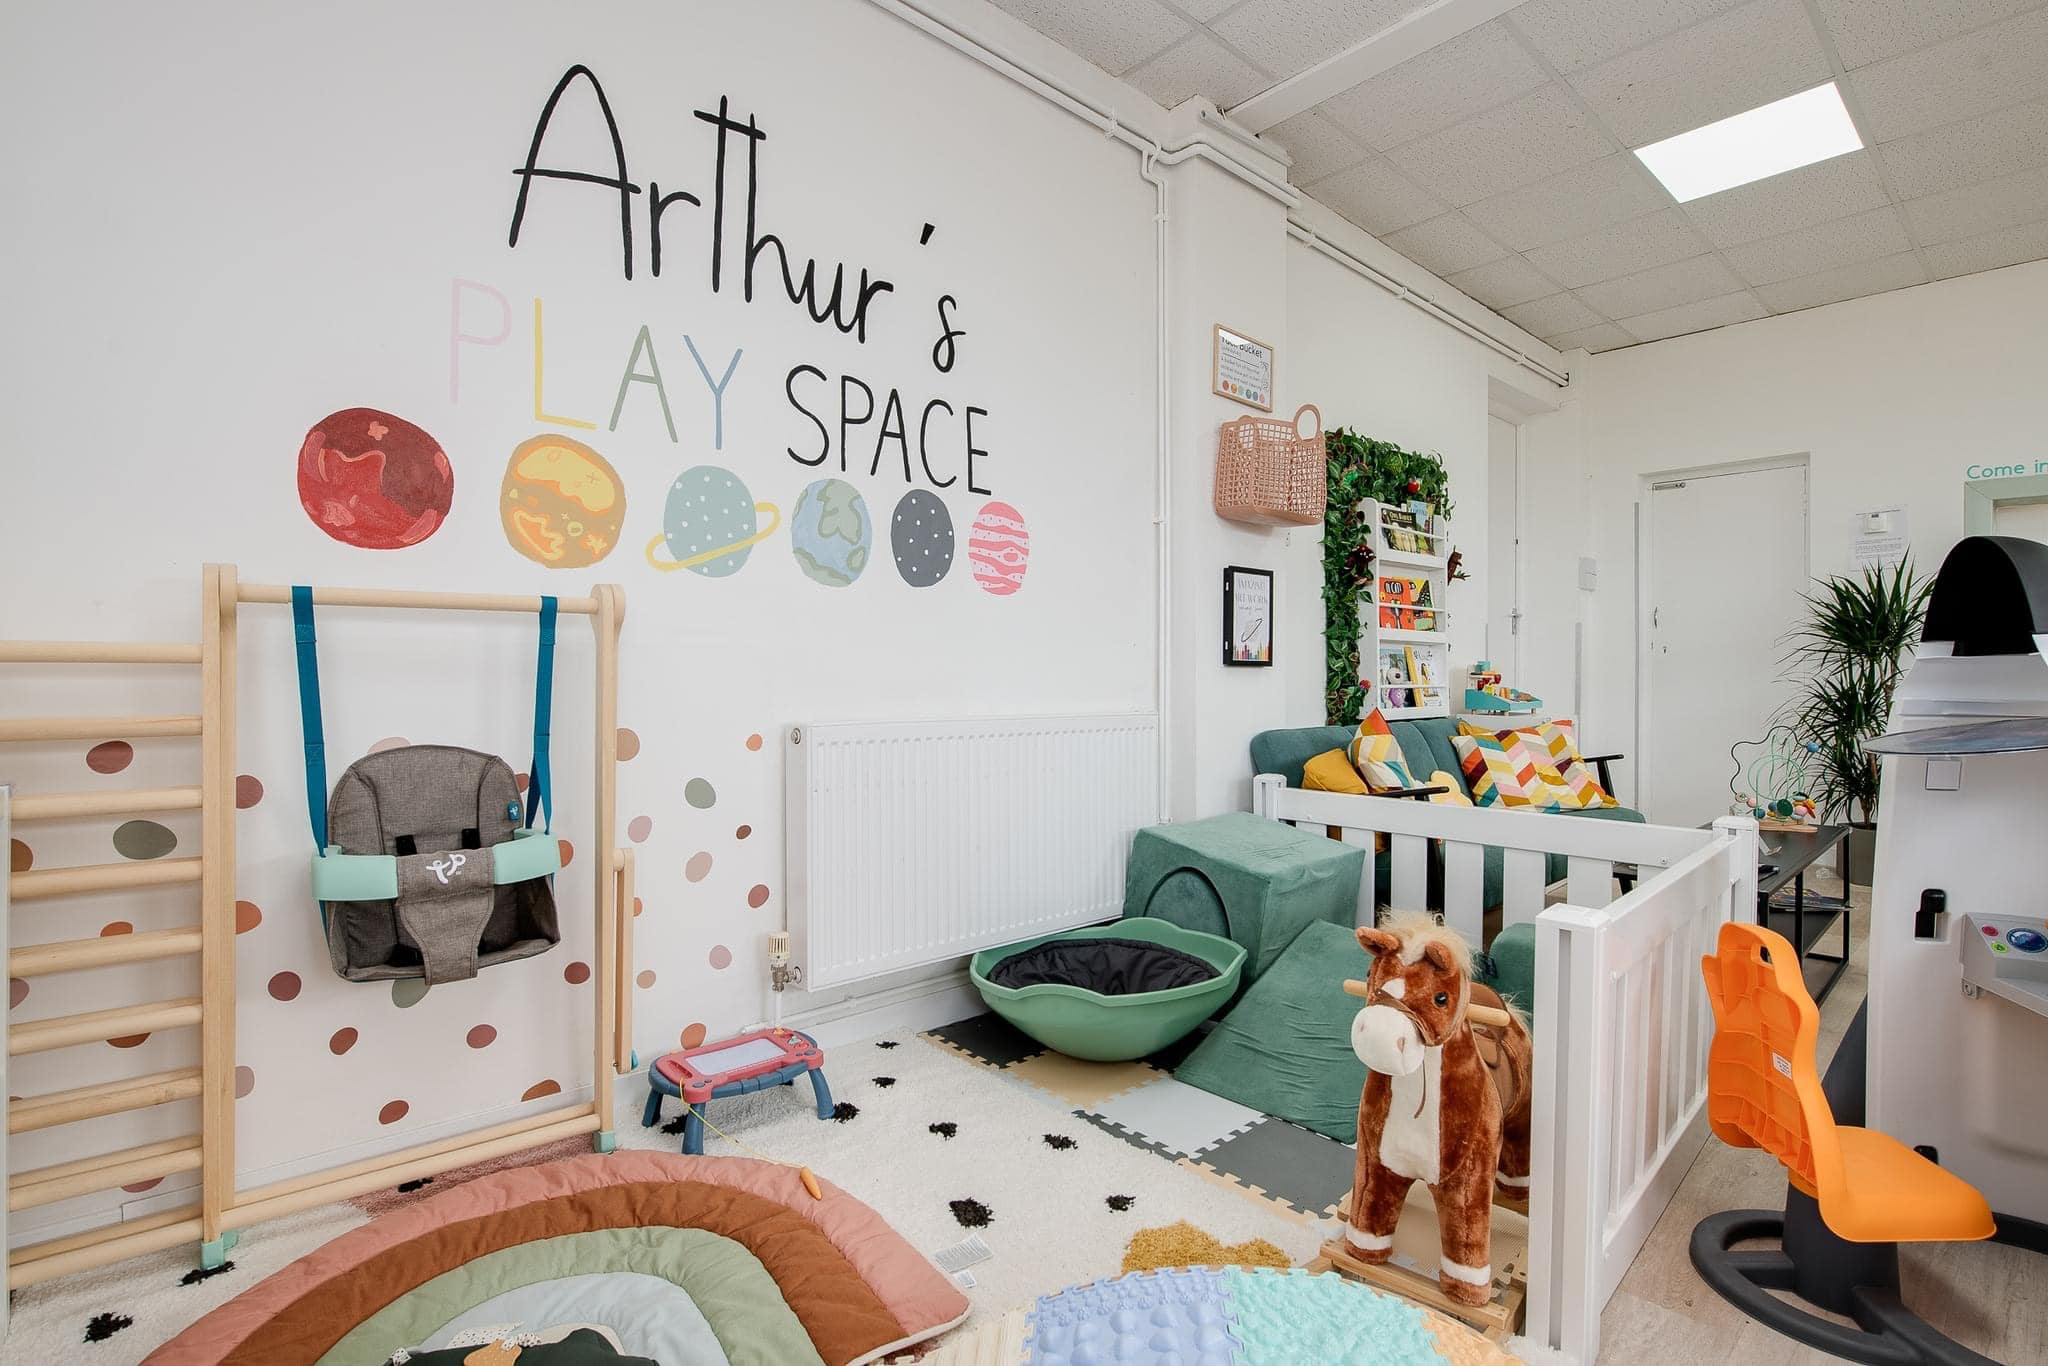 Welcoming Arthur's Play Space